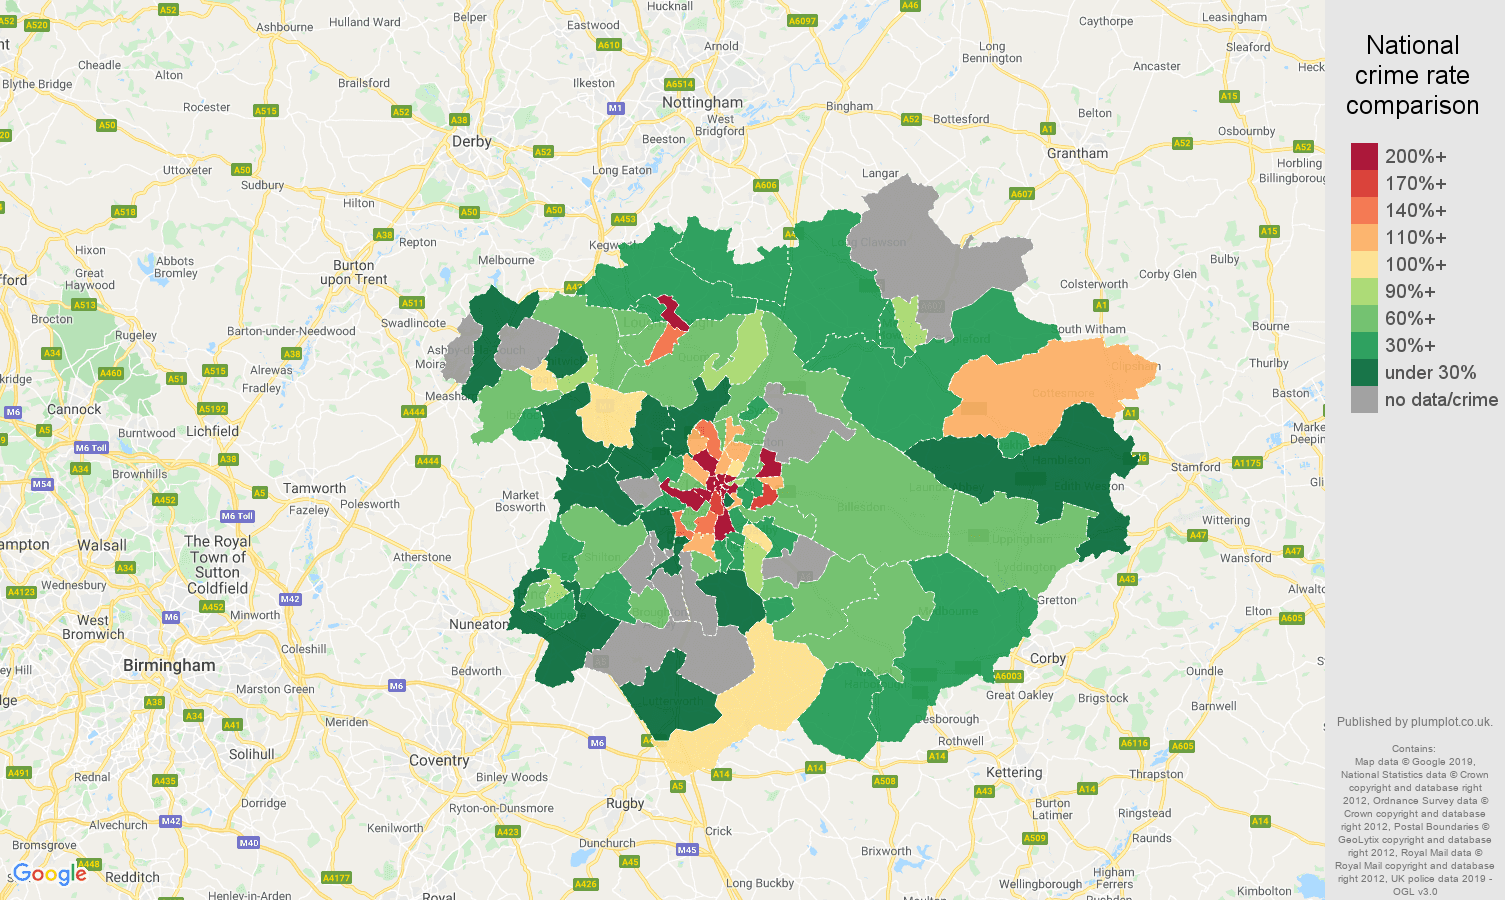 Leicester possession of weapons crime rate comparison map